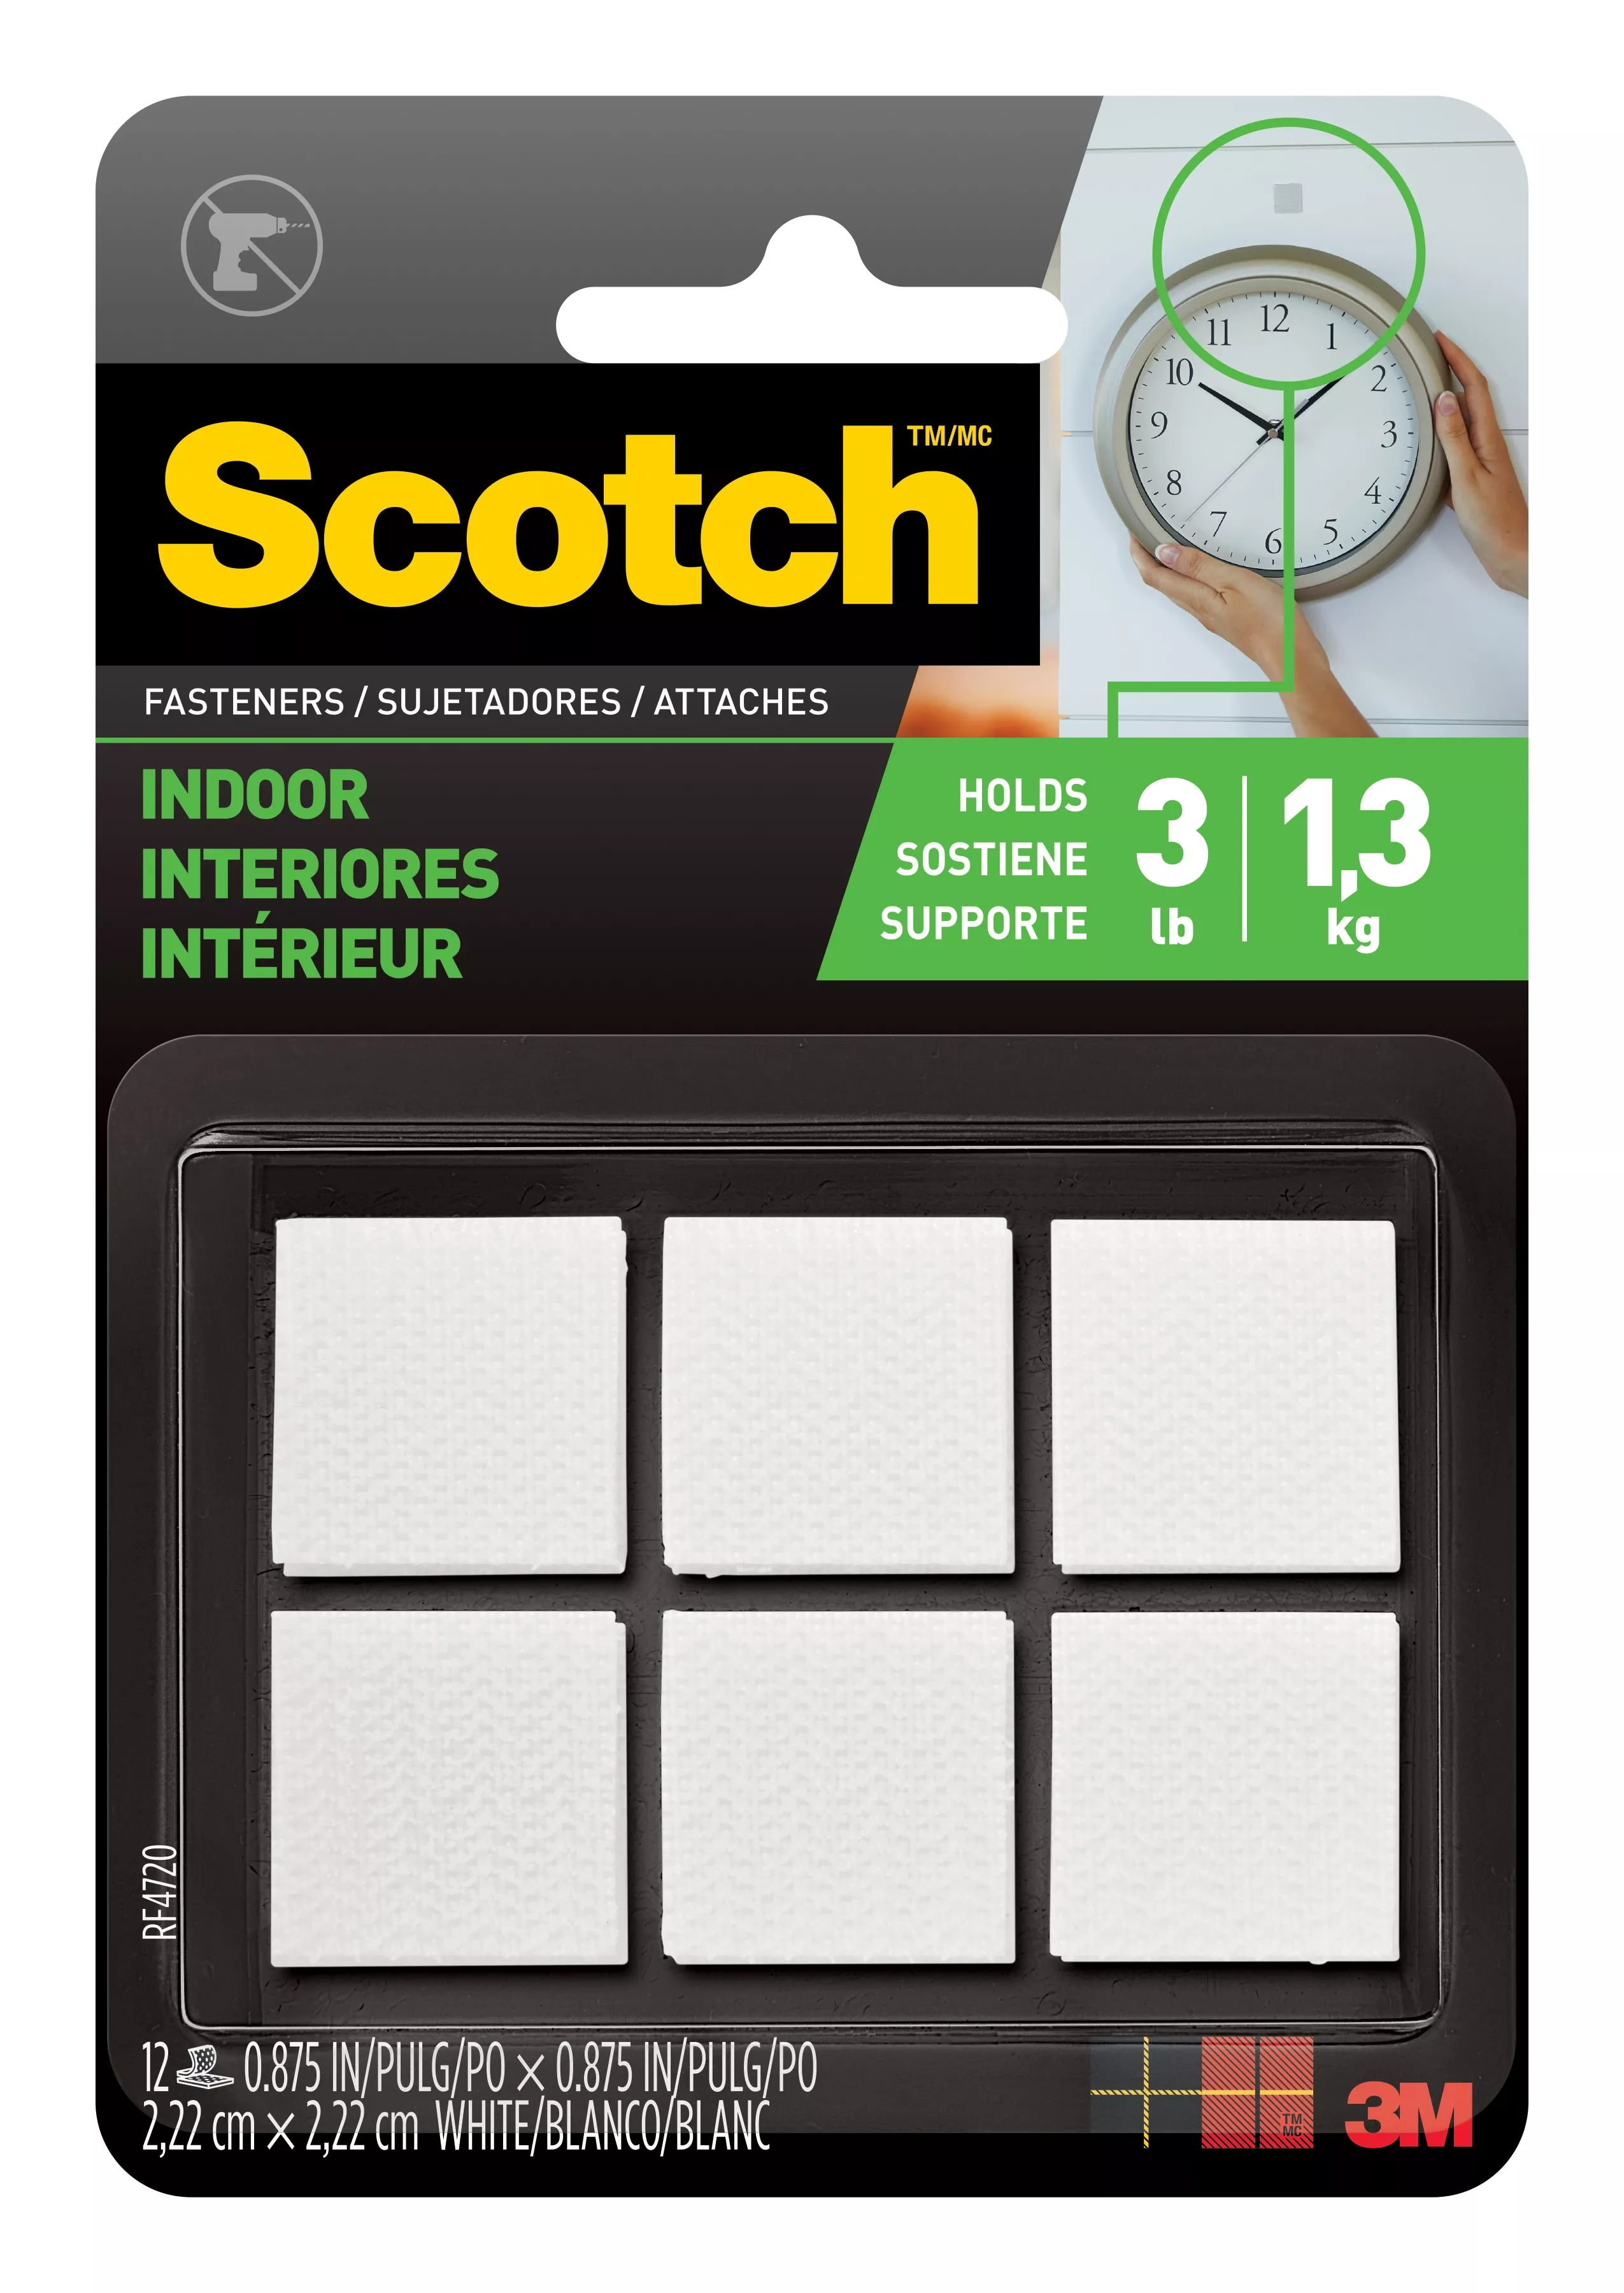 Scotch™ Indoor Fasteners RF4720, 7/8 in x 7/8 in (22,2 mm x 22,2 mm),
White, 12 Sets of Squares